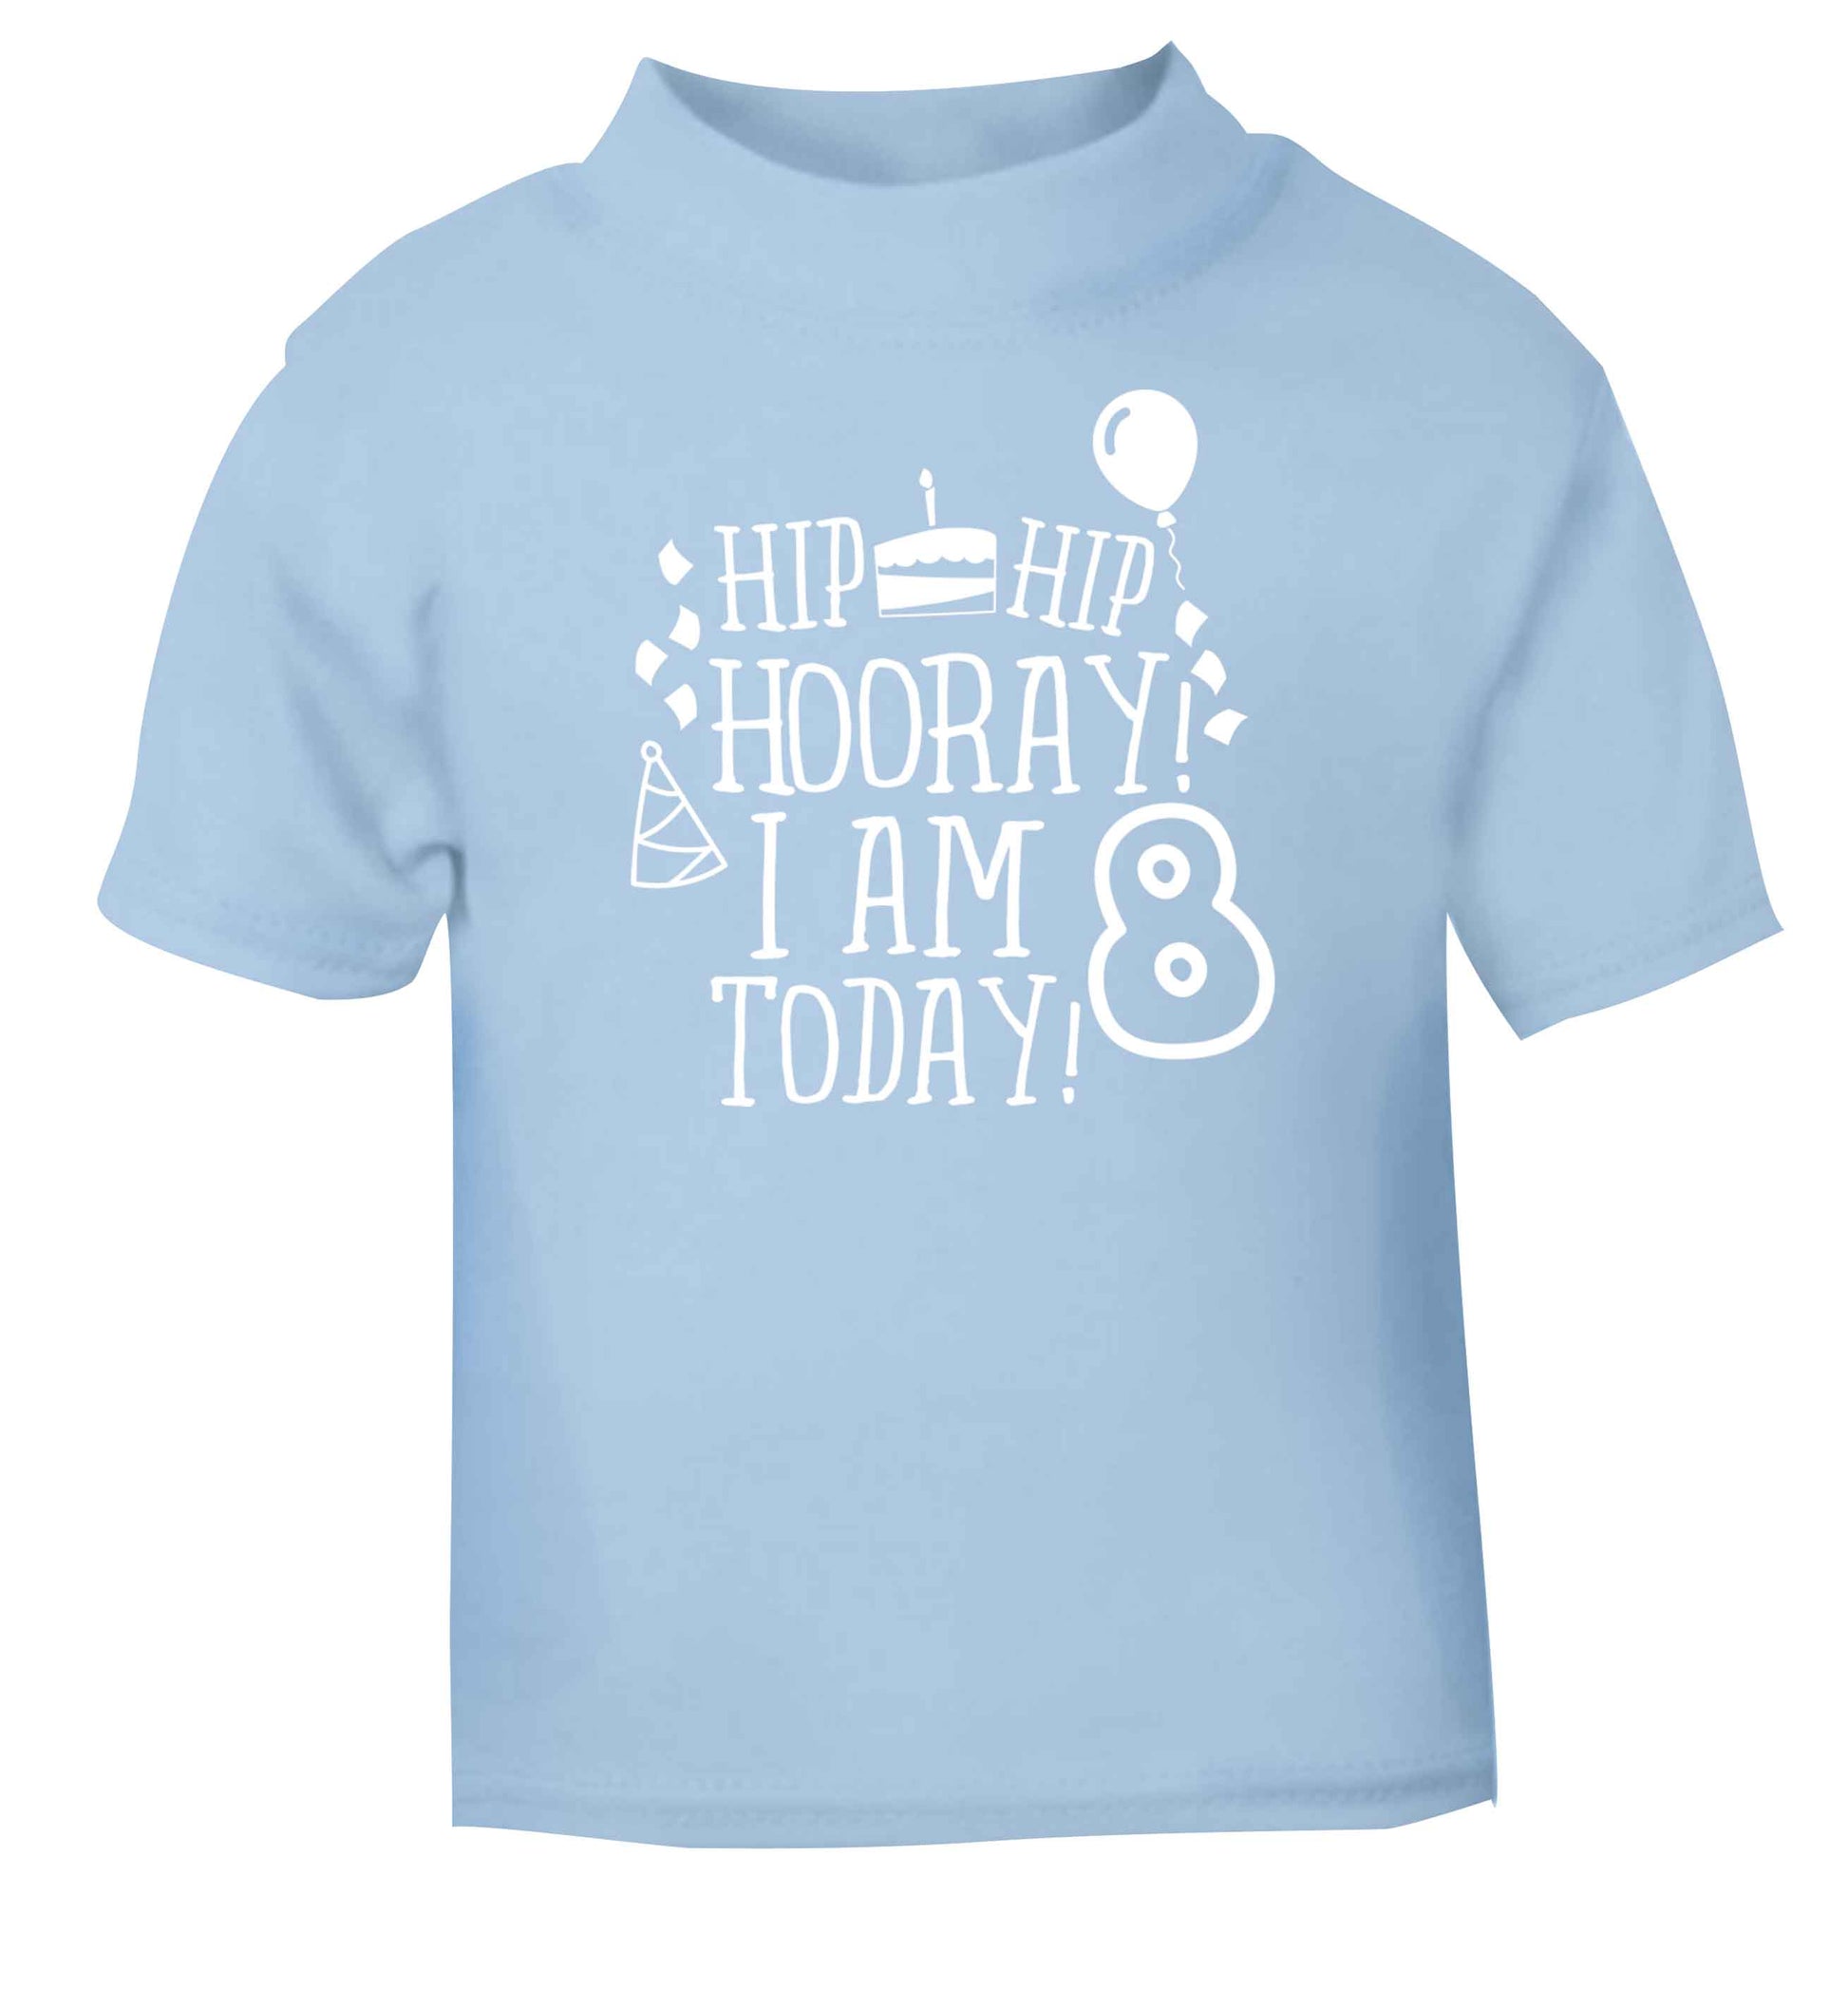 Hip hip hooray I am 8 today! light blue baby toddler Tshirt 2 Years